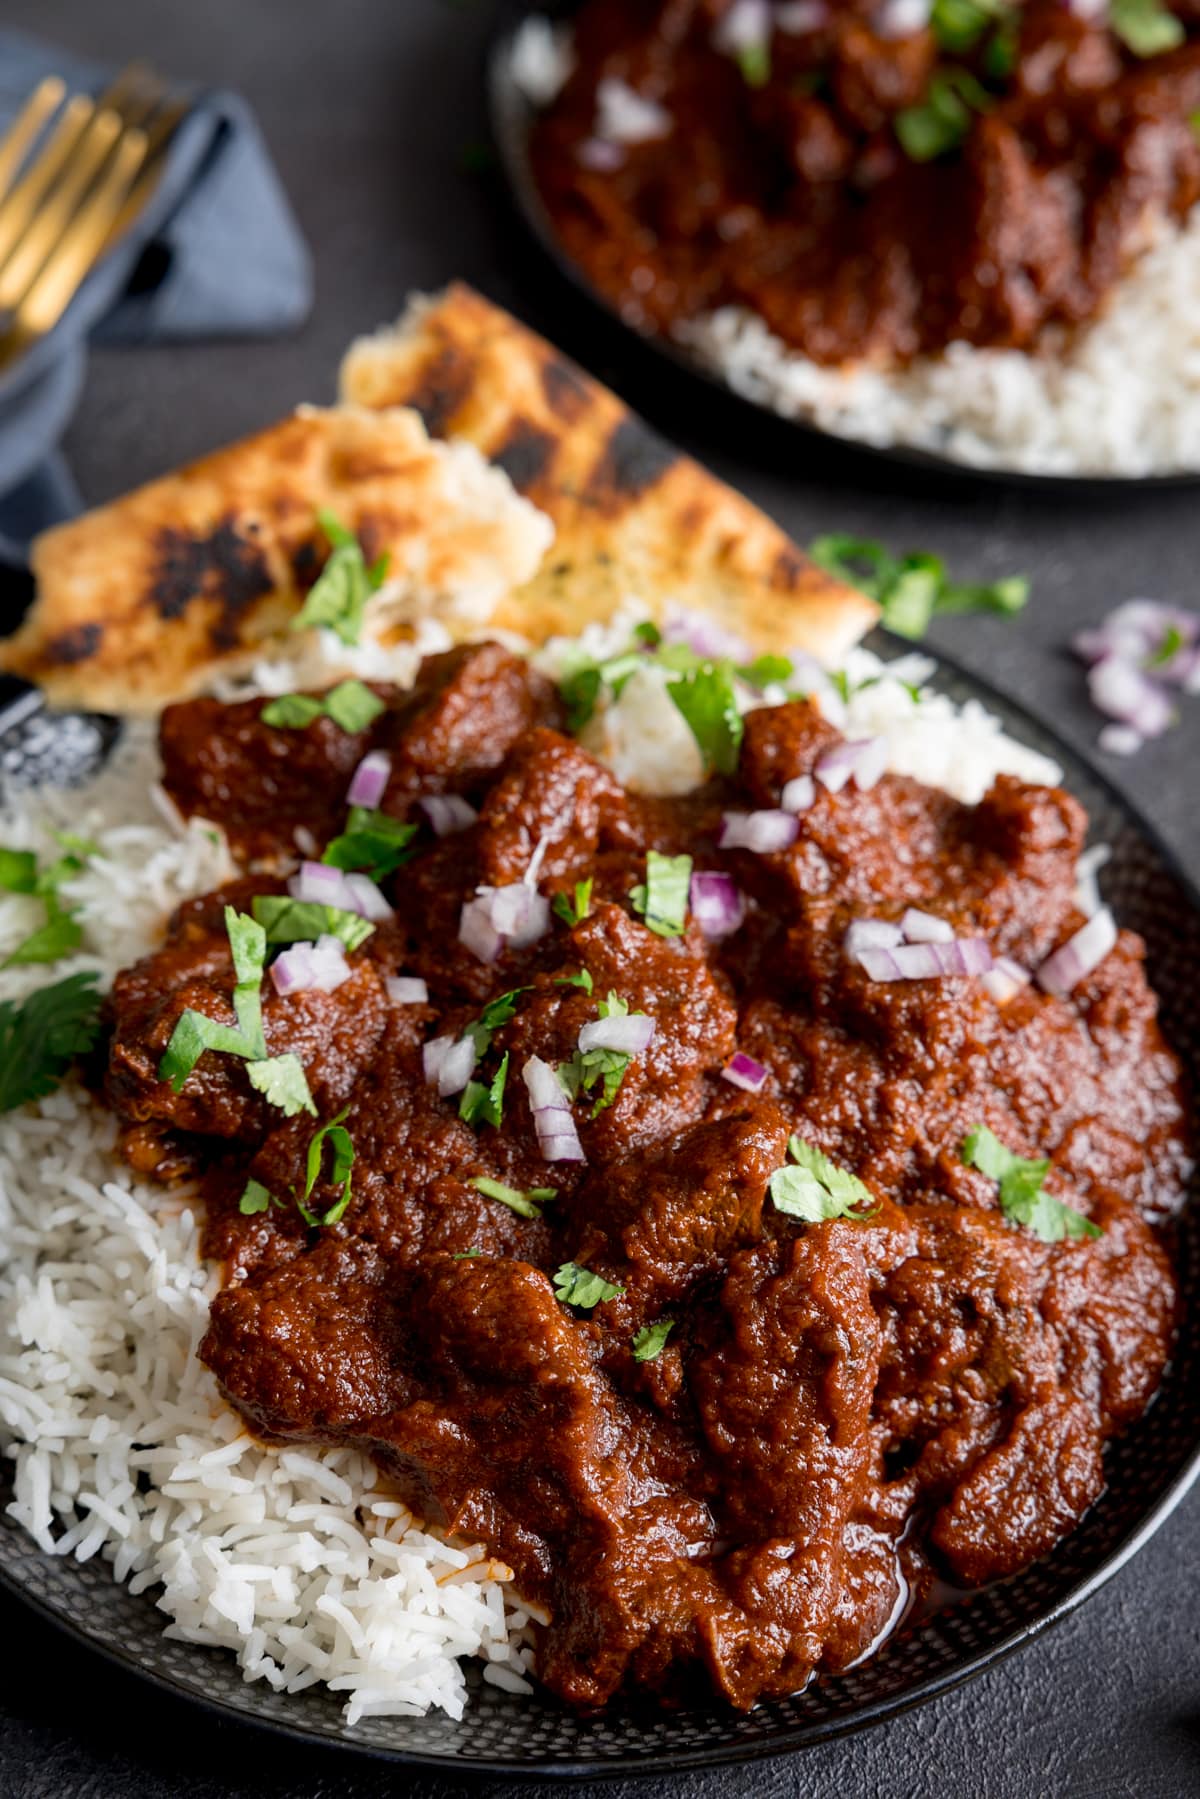 Close up image of slow cooked beef madras in a black bowl with rice and pieces of naan bread. There is coriander (cilantro) sprinkled on top. The bowl is on a dark surface and there is a further bowl of madras in the background.